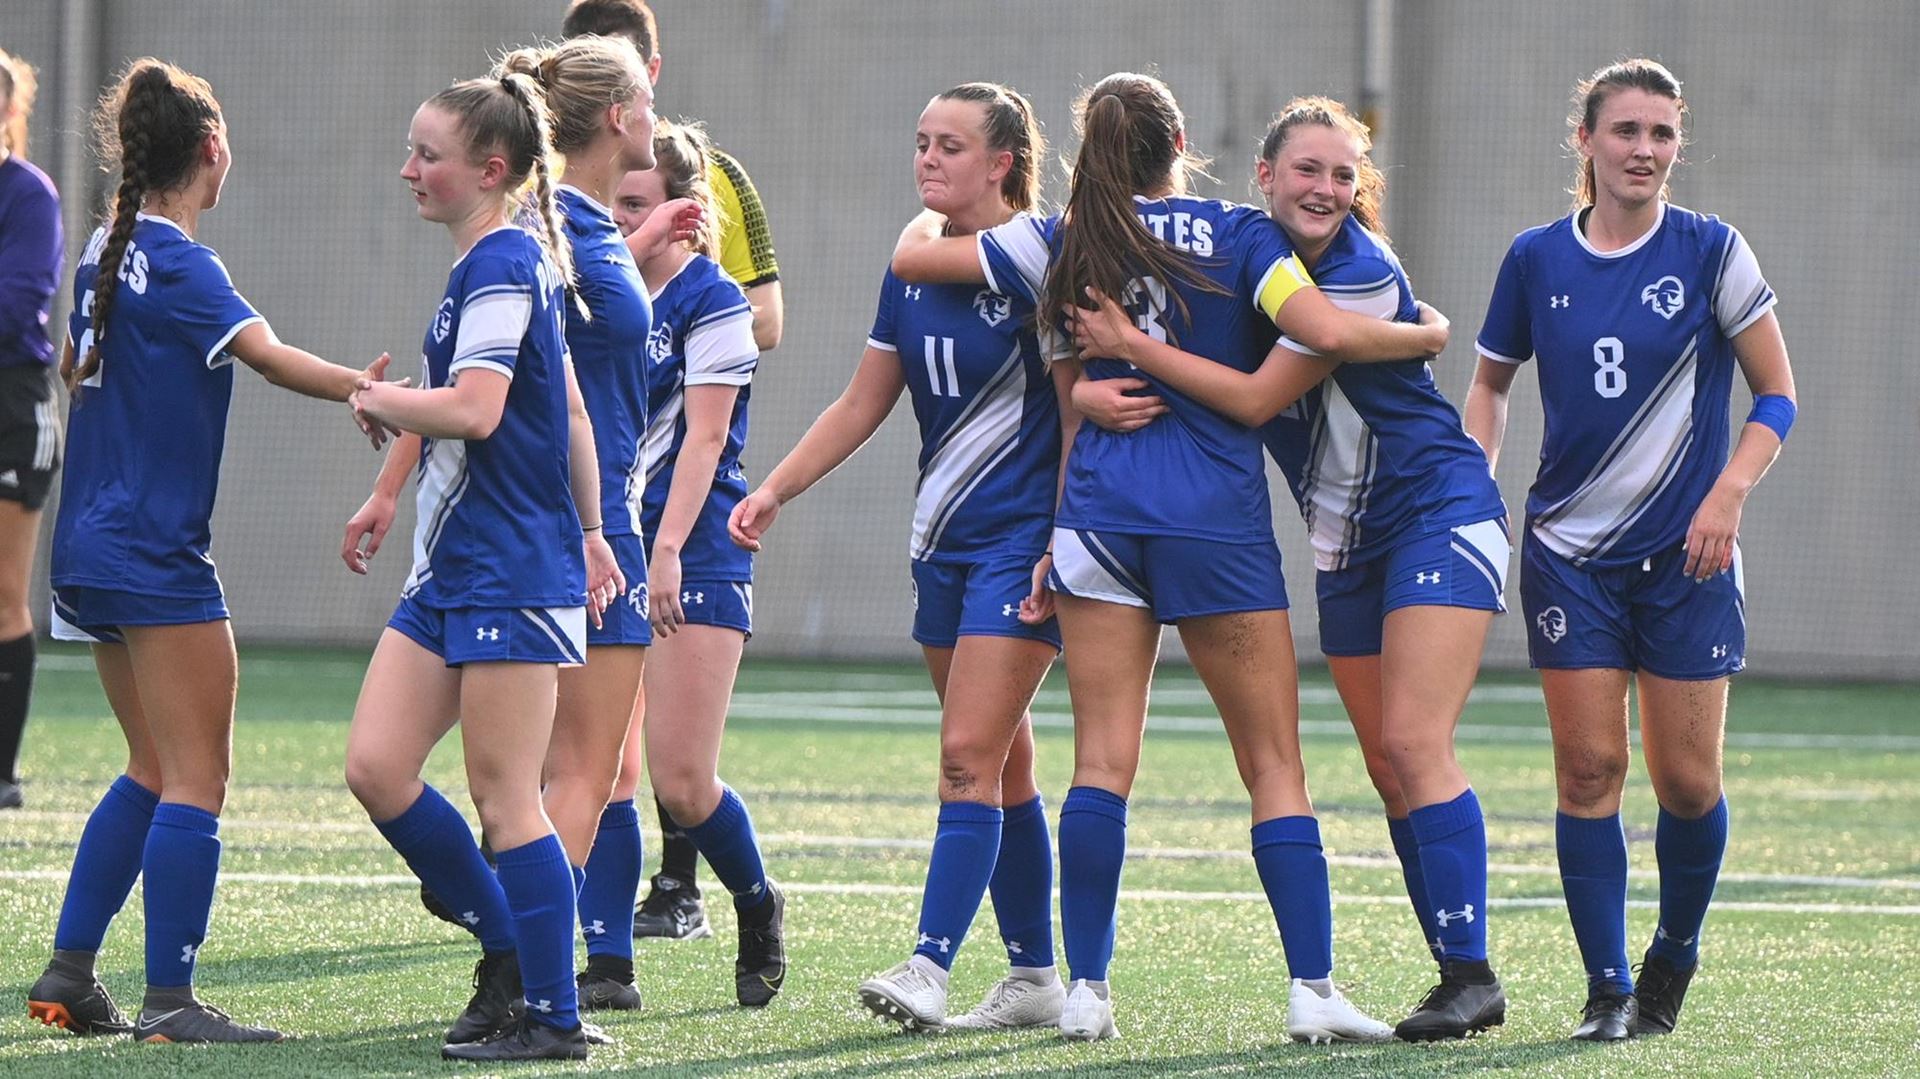 The Seton Hall women's soccer team celebrates after their third straight victory.